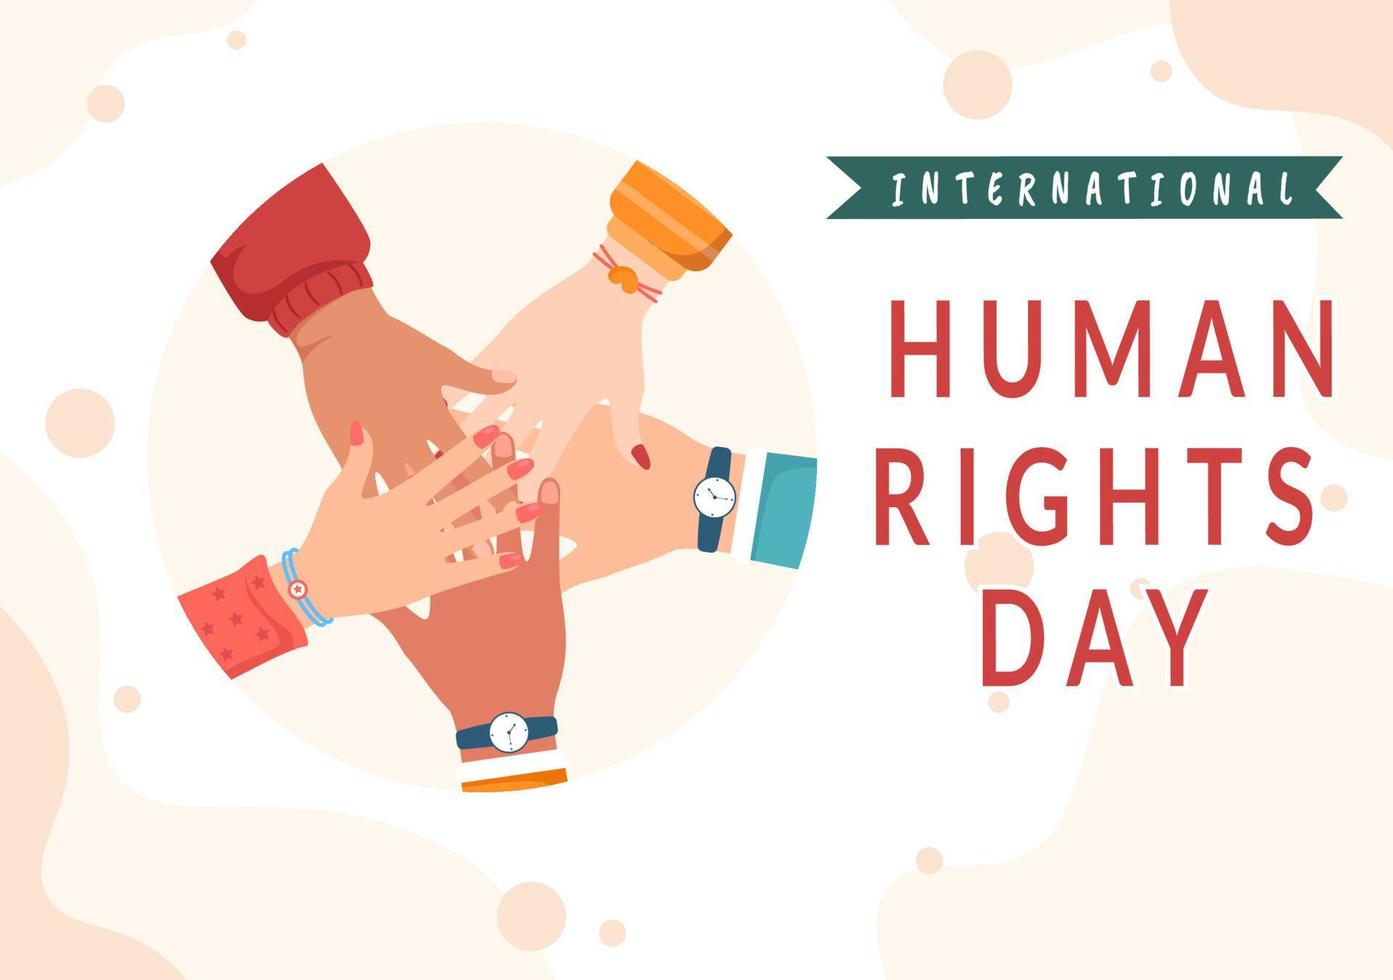 Human Rights Day Template Hand Drawn Flat Cartoon Illustration with Hands Raised Breaking Chains or Holding Hand Design vector